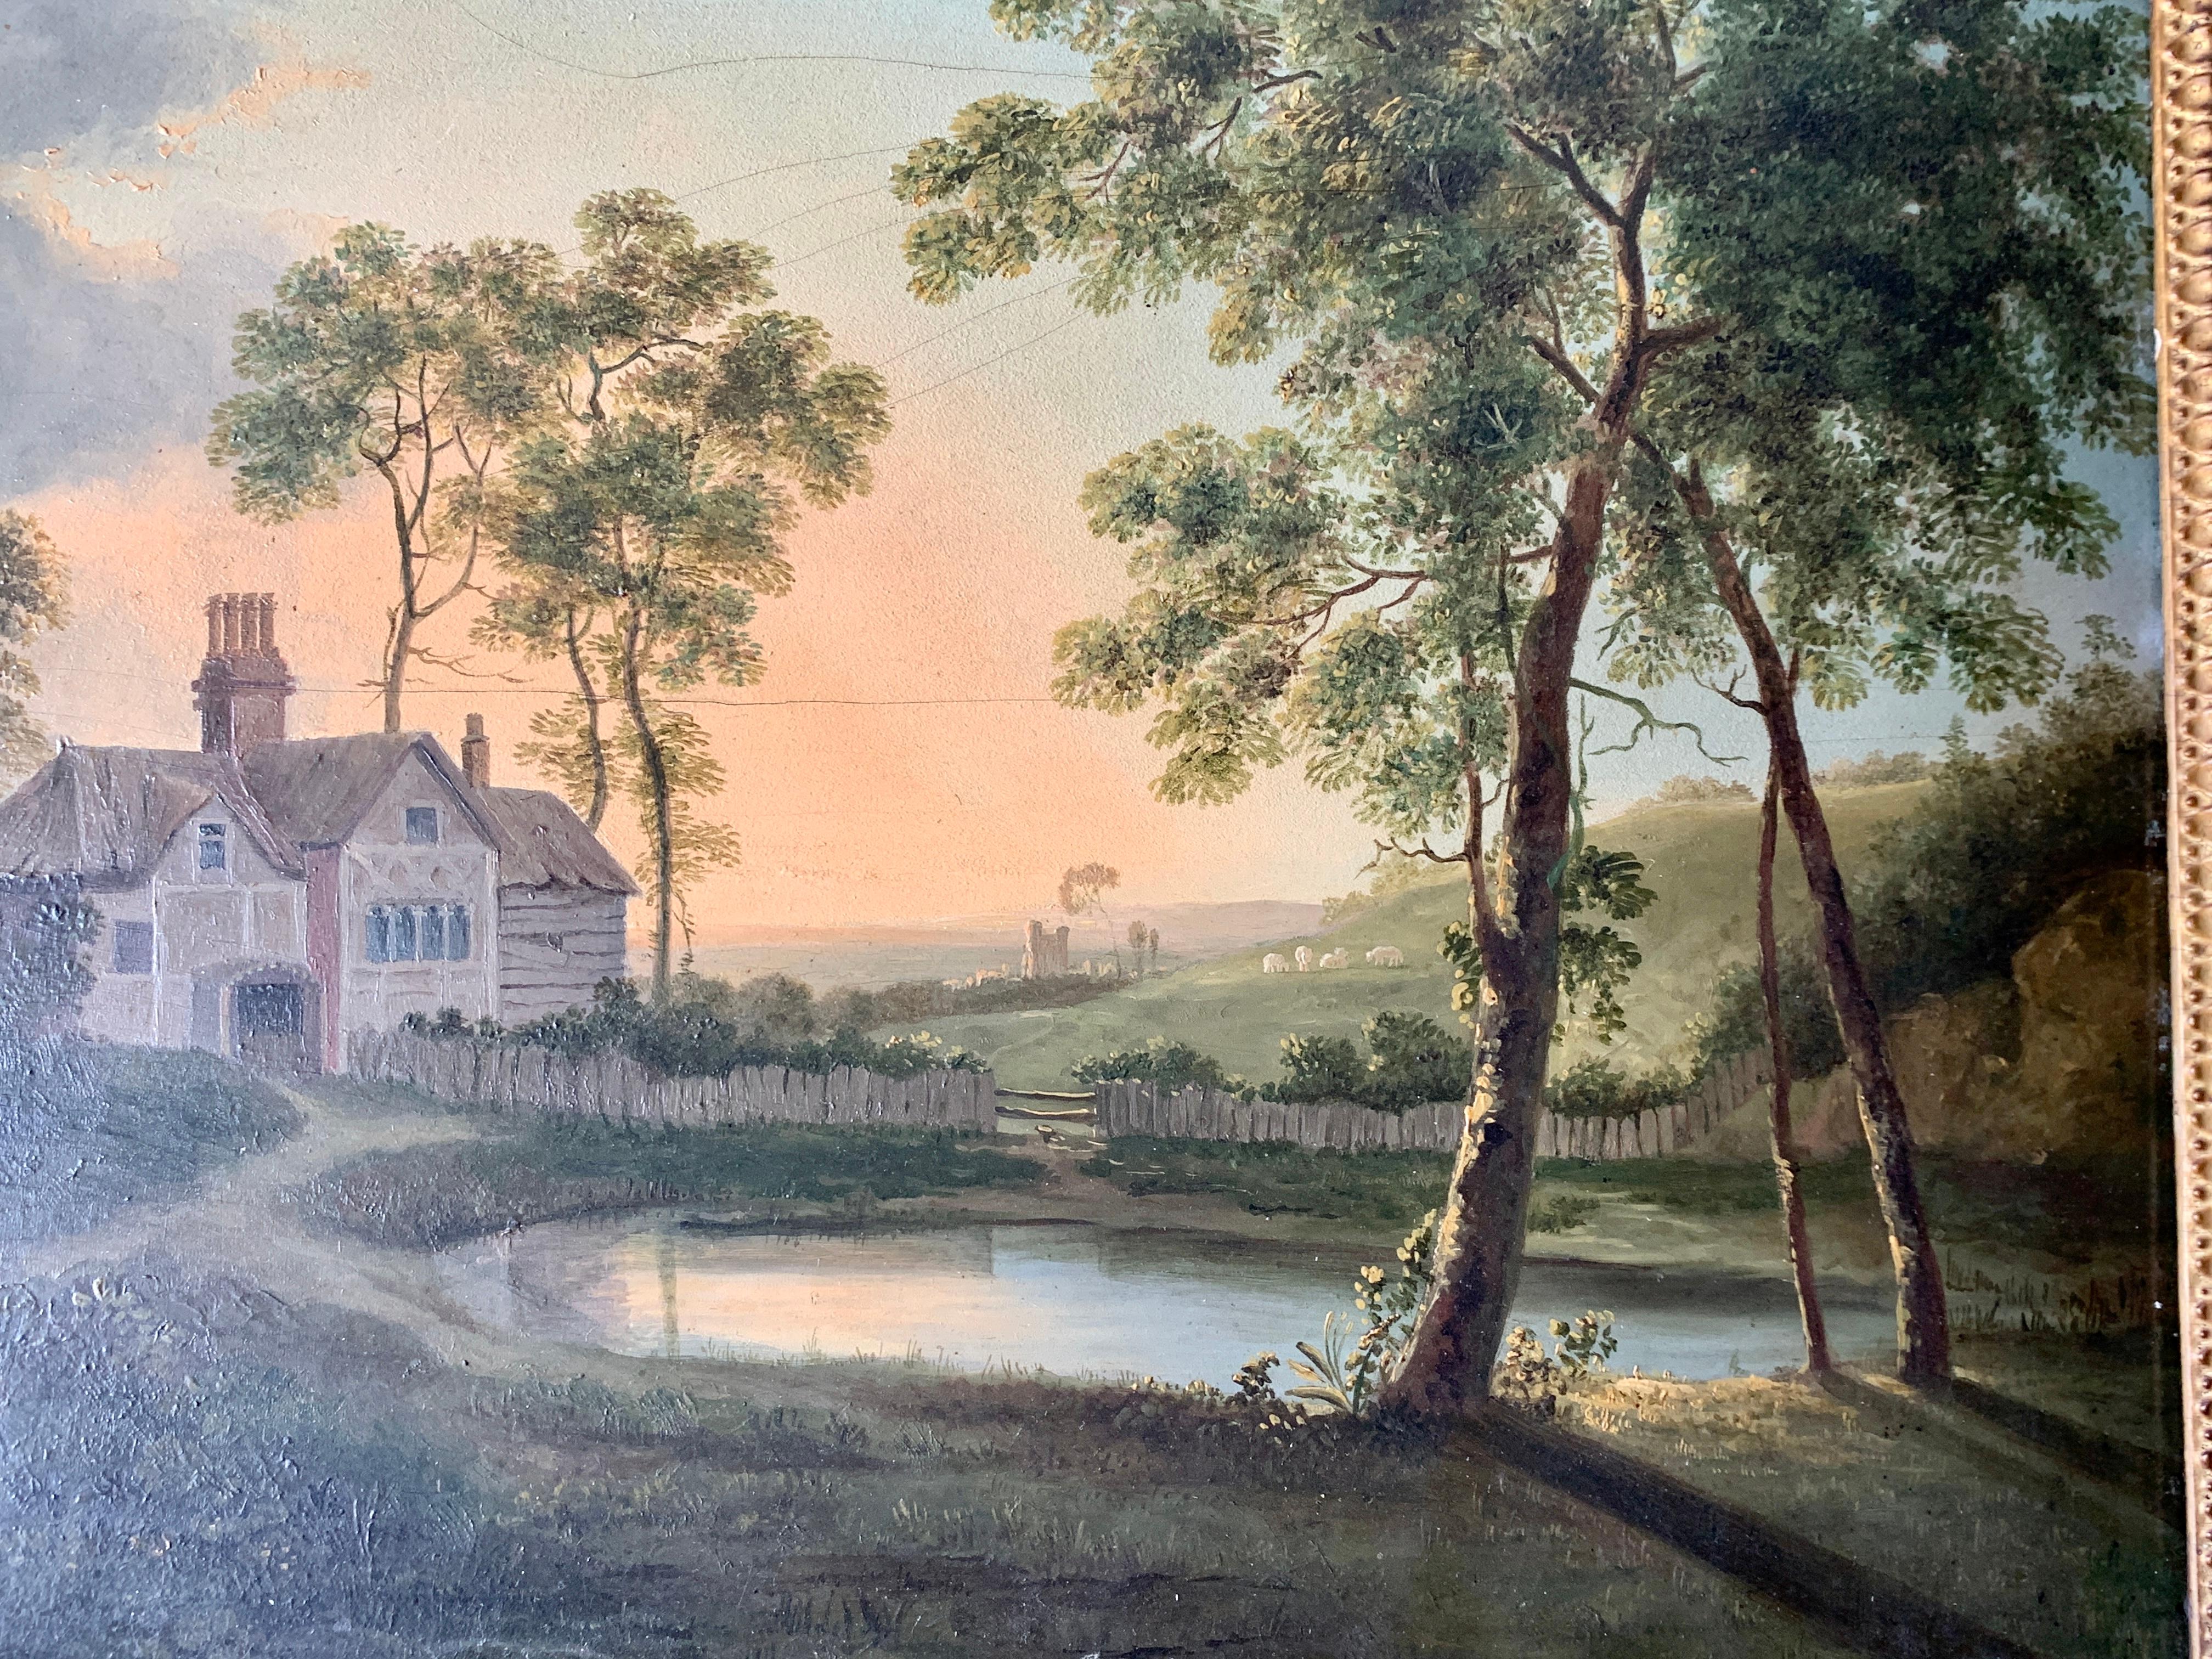 19th century English landscape with a cottage, pond, trees at sunrise or sunset For Sale 1